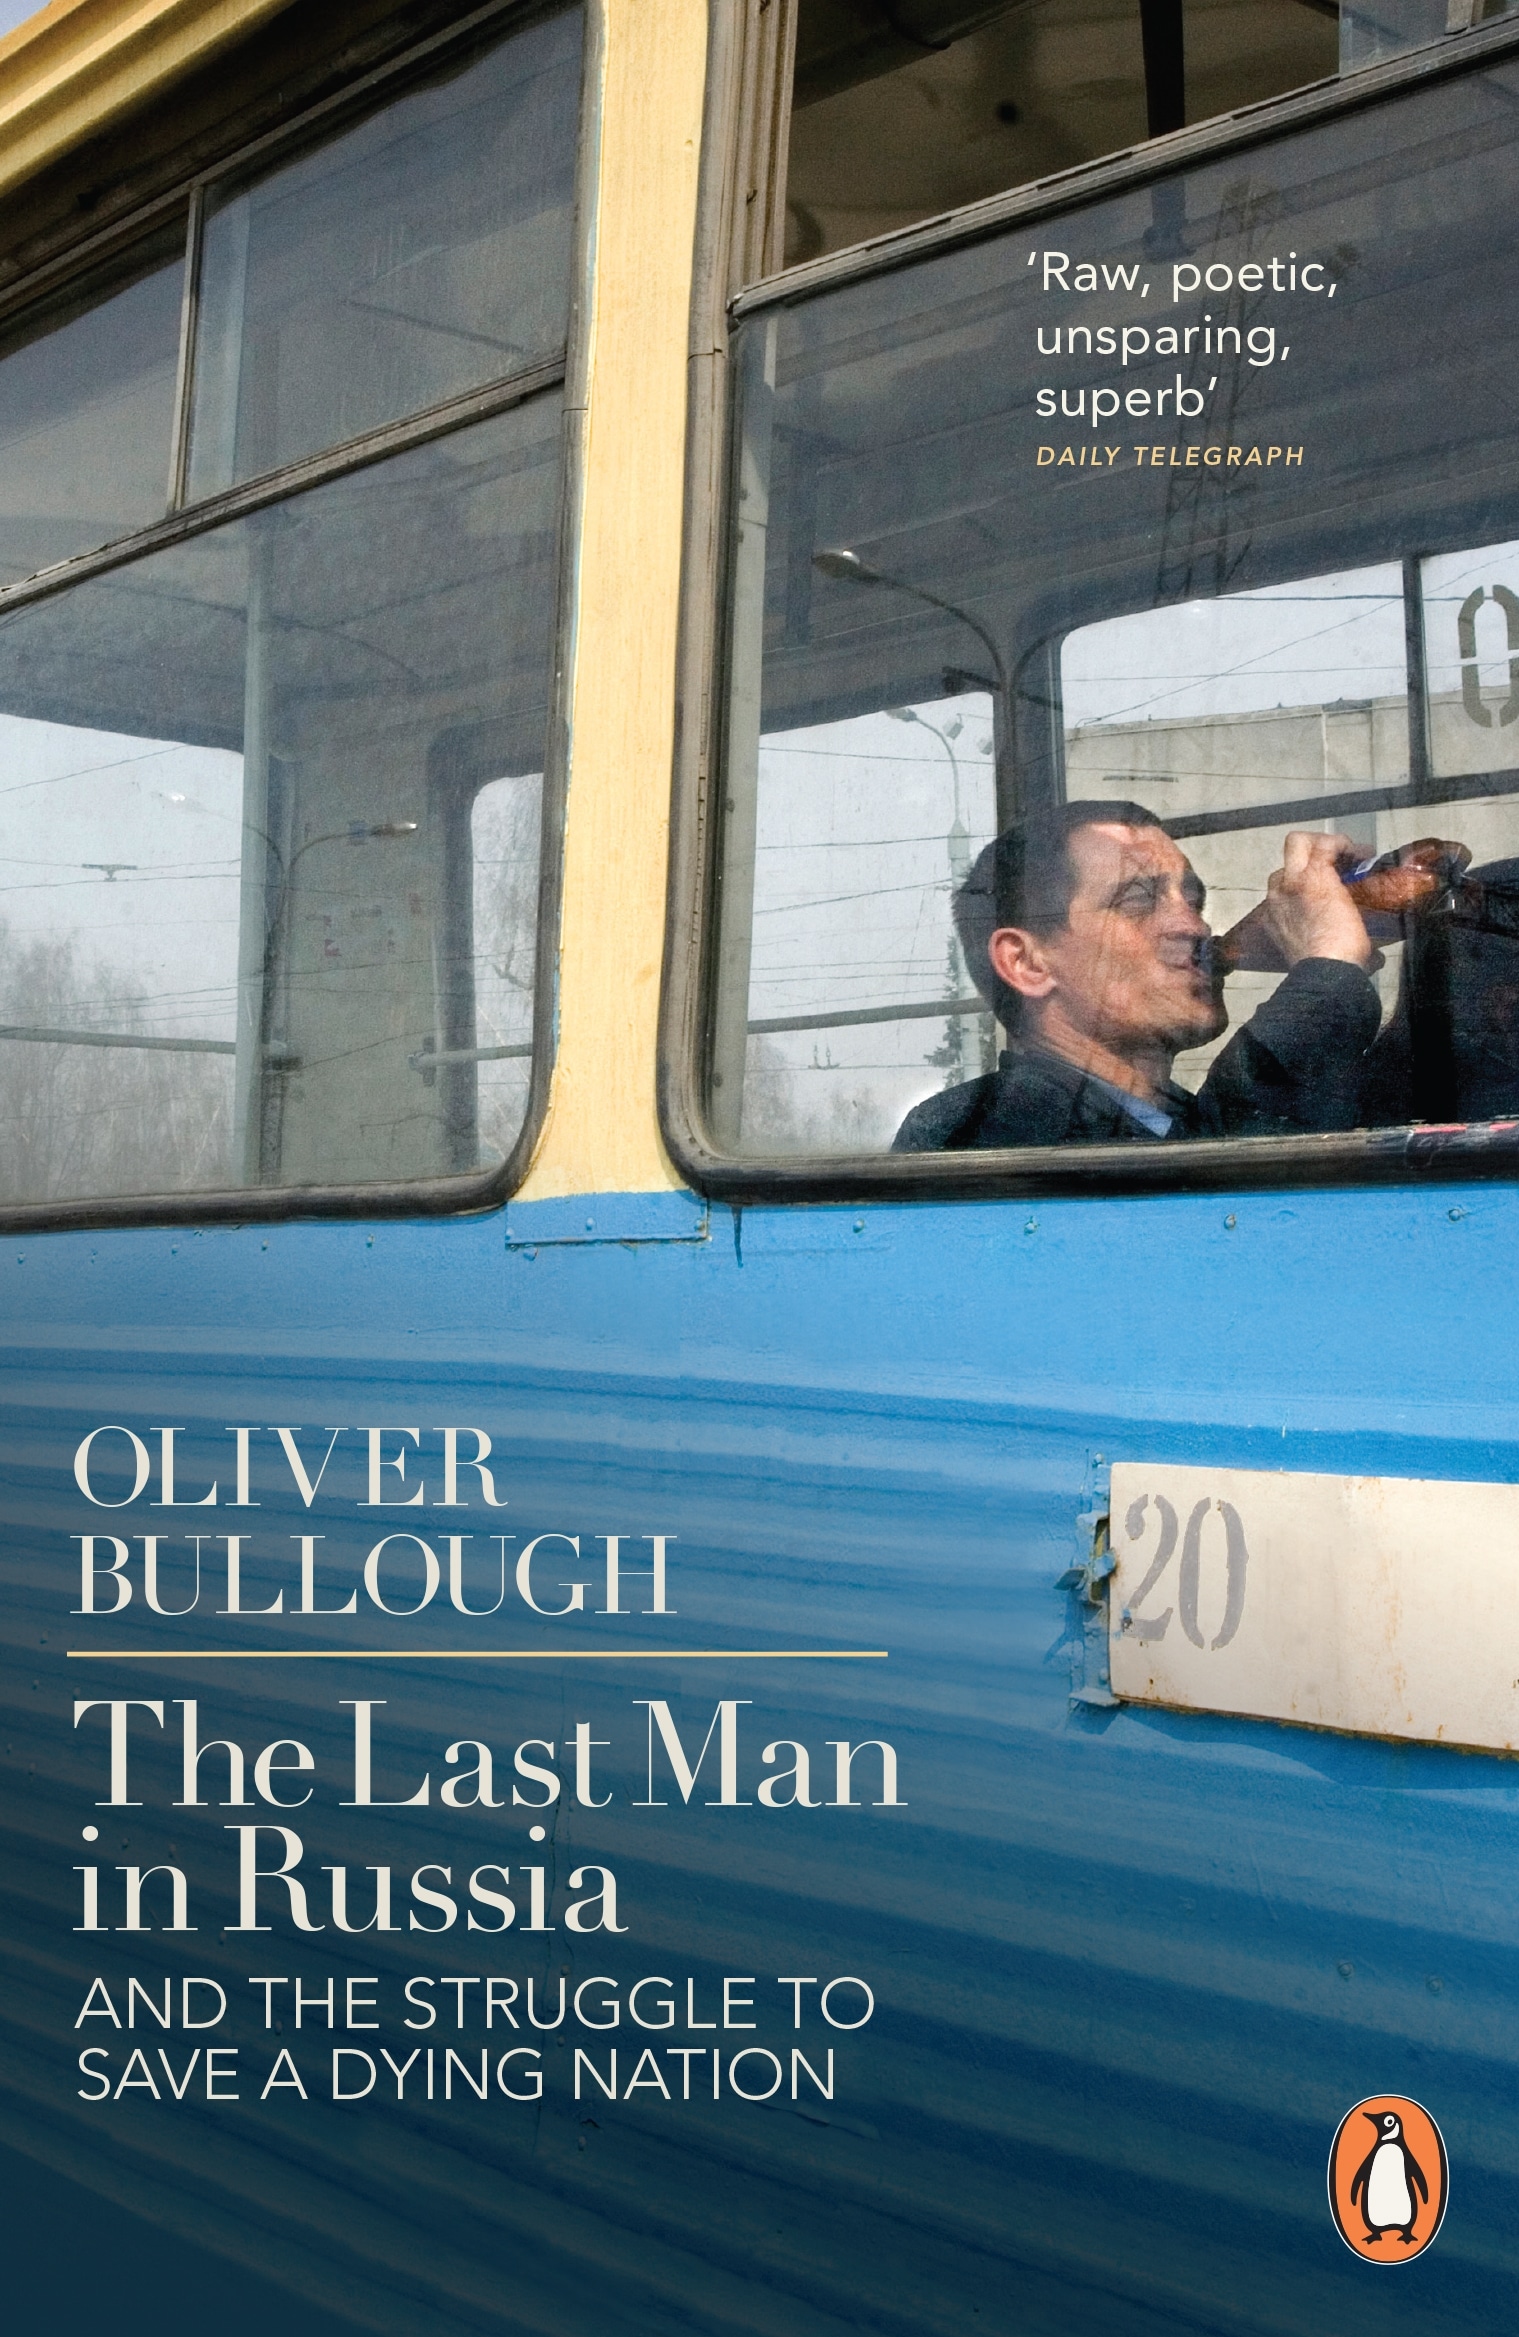 Book “The Last Man in Russia” by Oliver Bullough — February 6, 2014